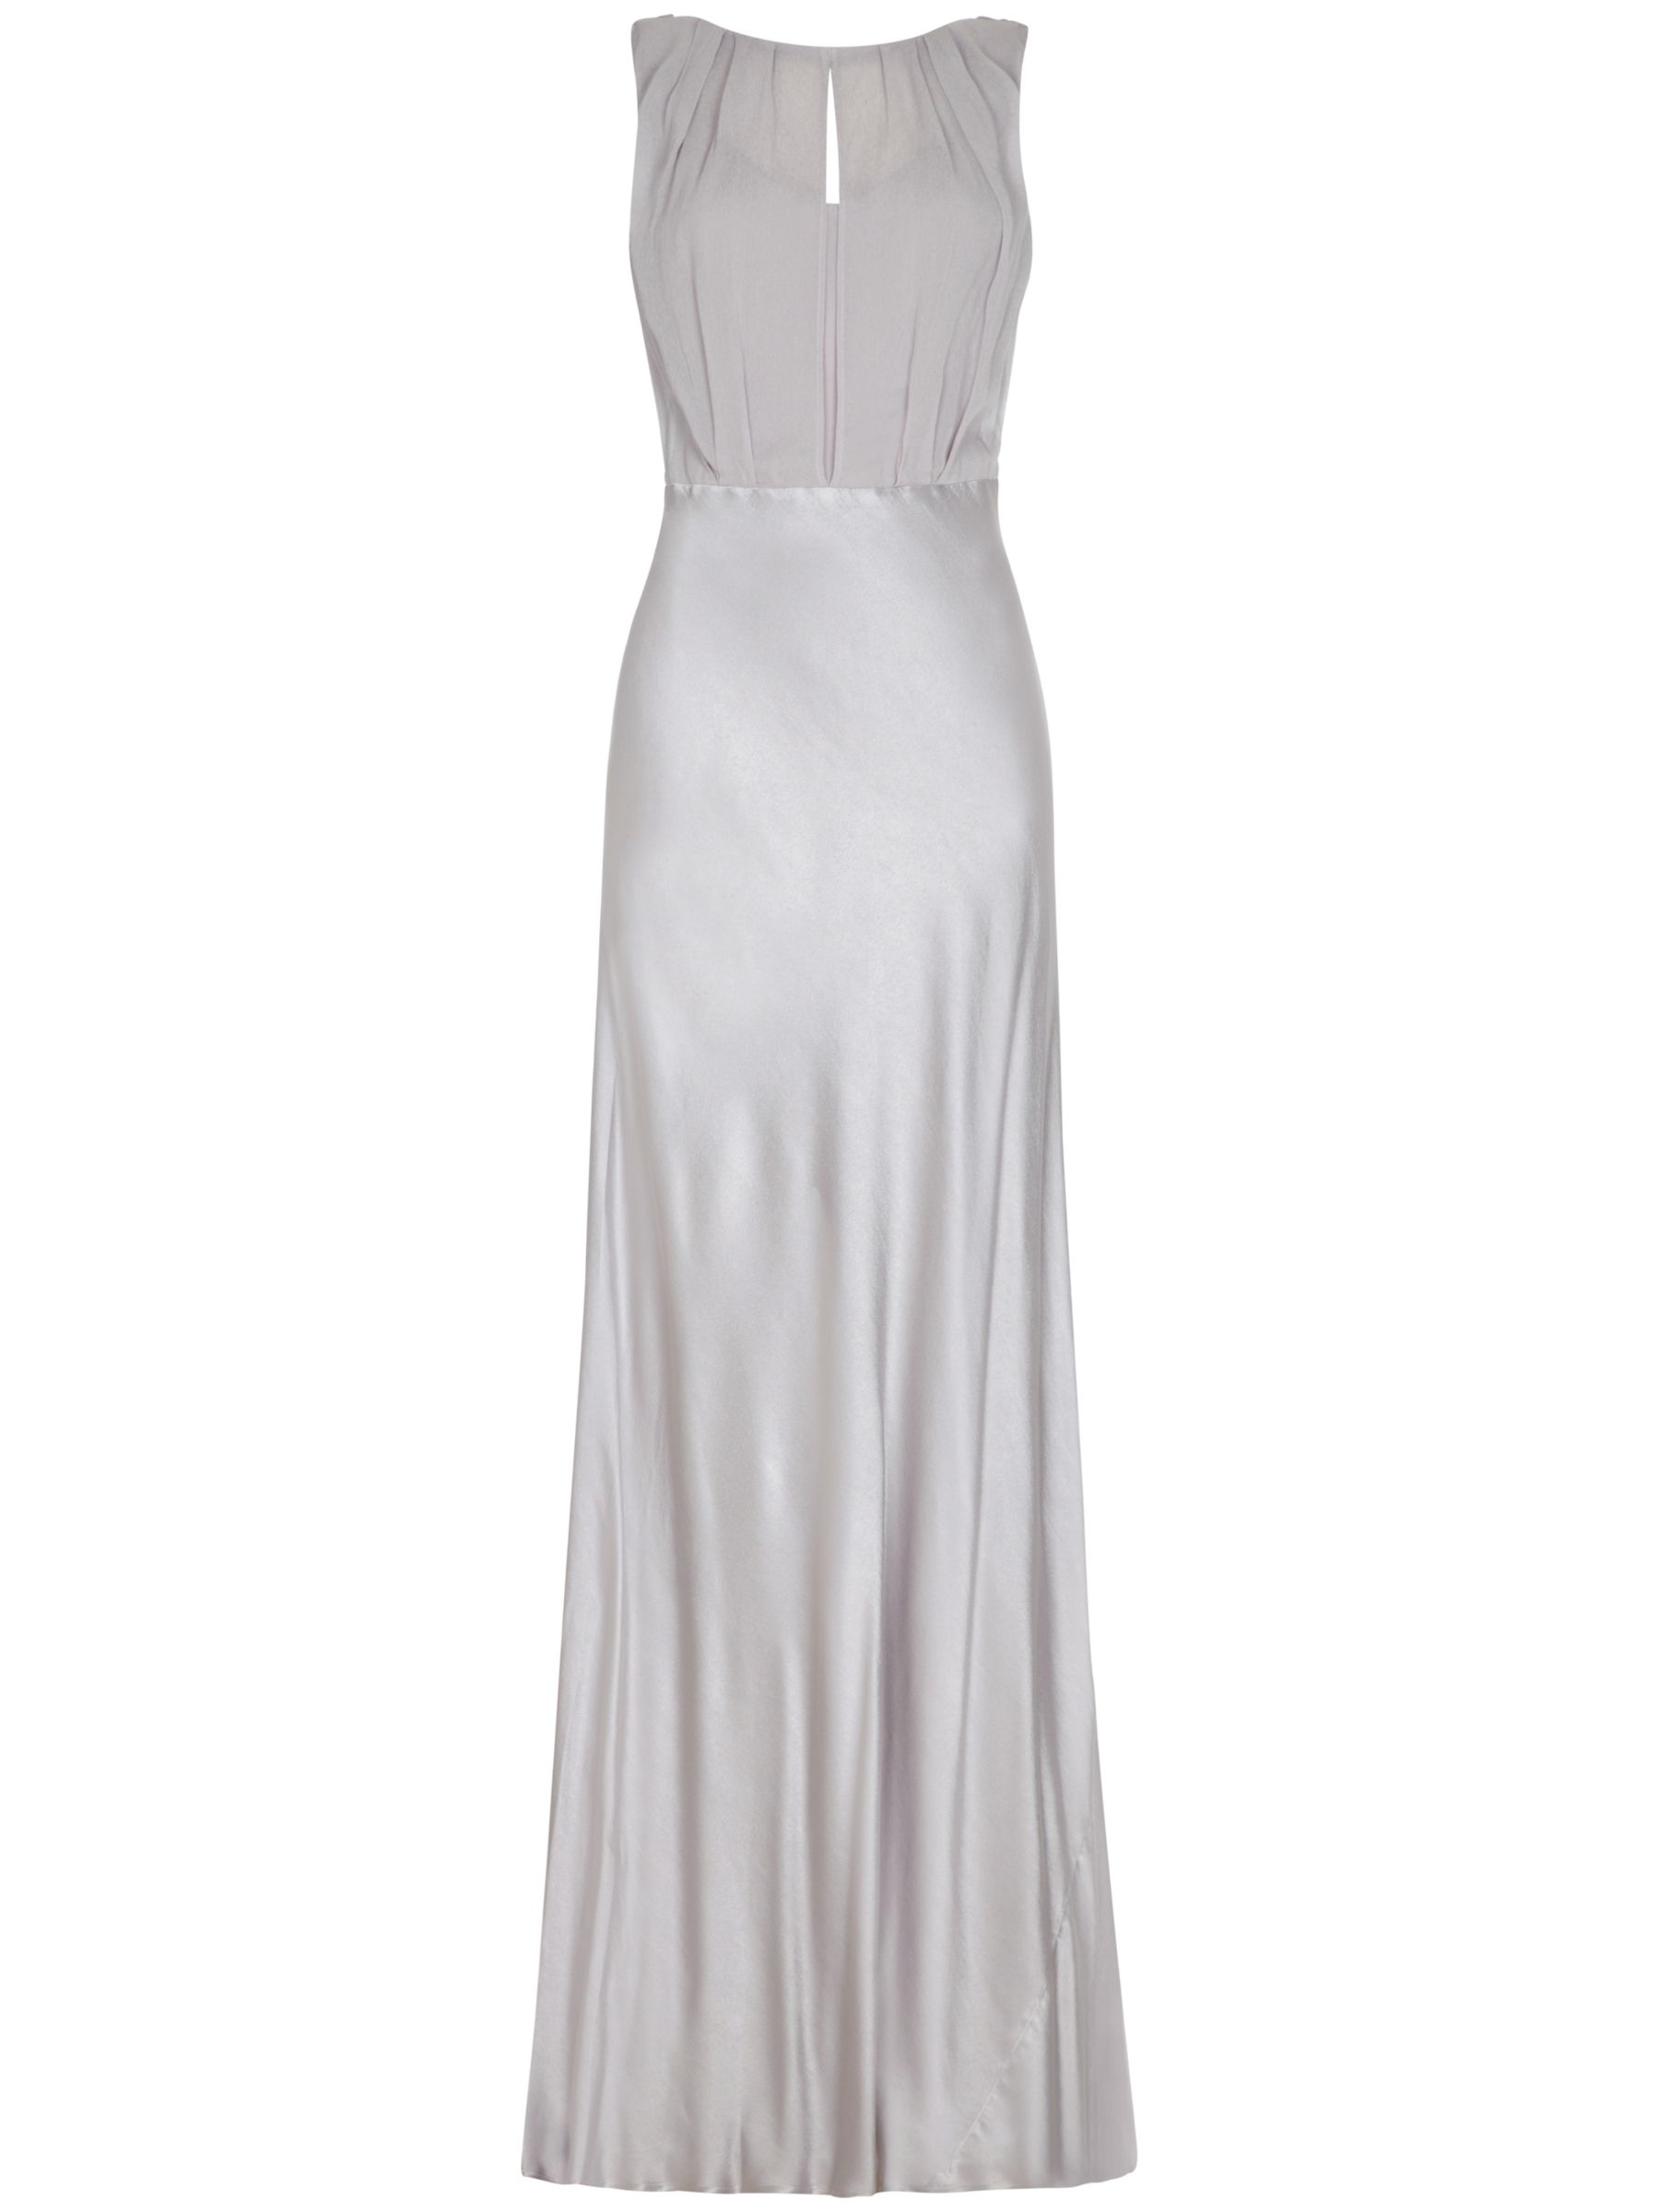 Bridesmaids Dresses | Phase Eight | Bridal Party | Ghost | Maid of ...